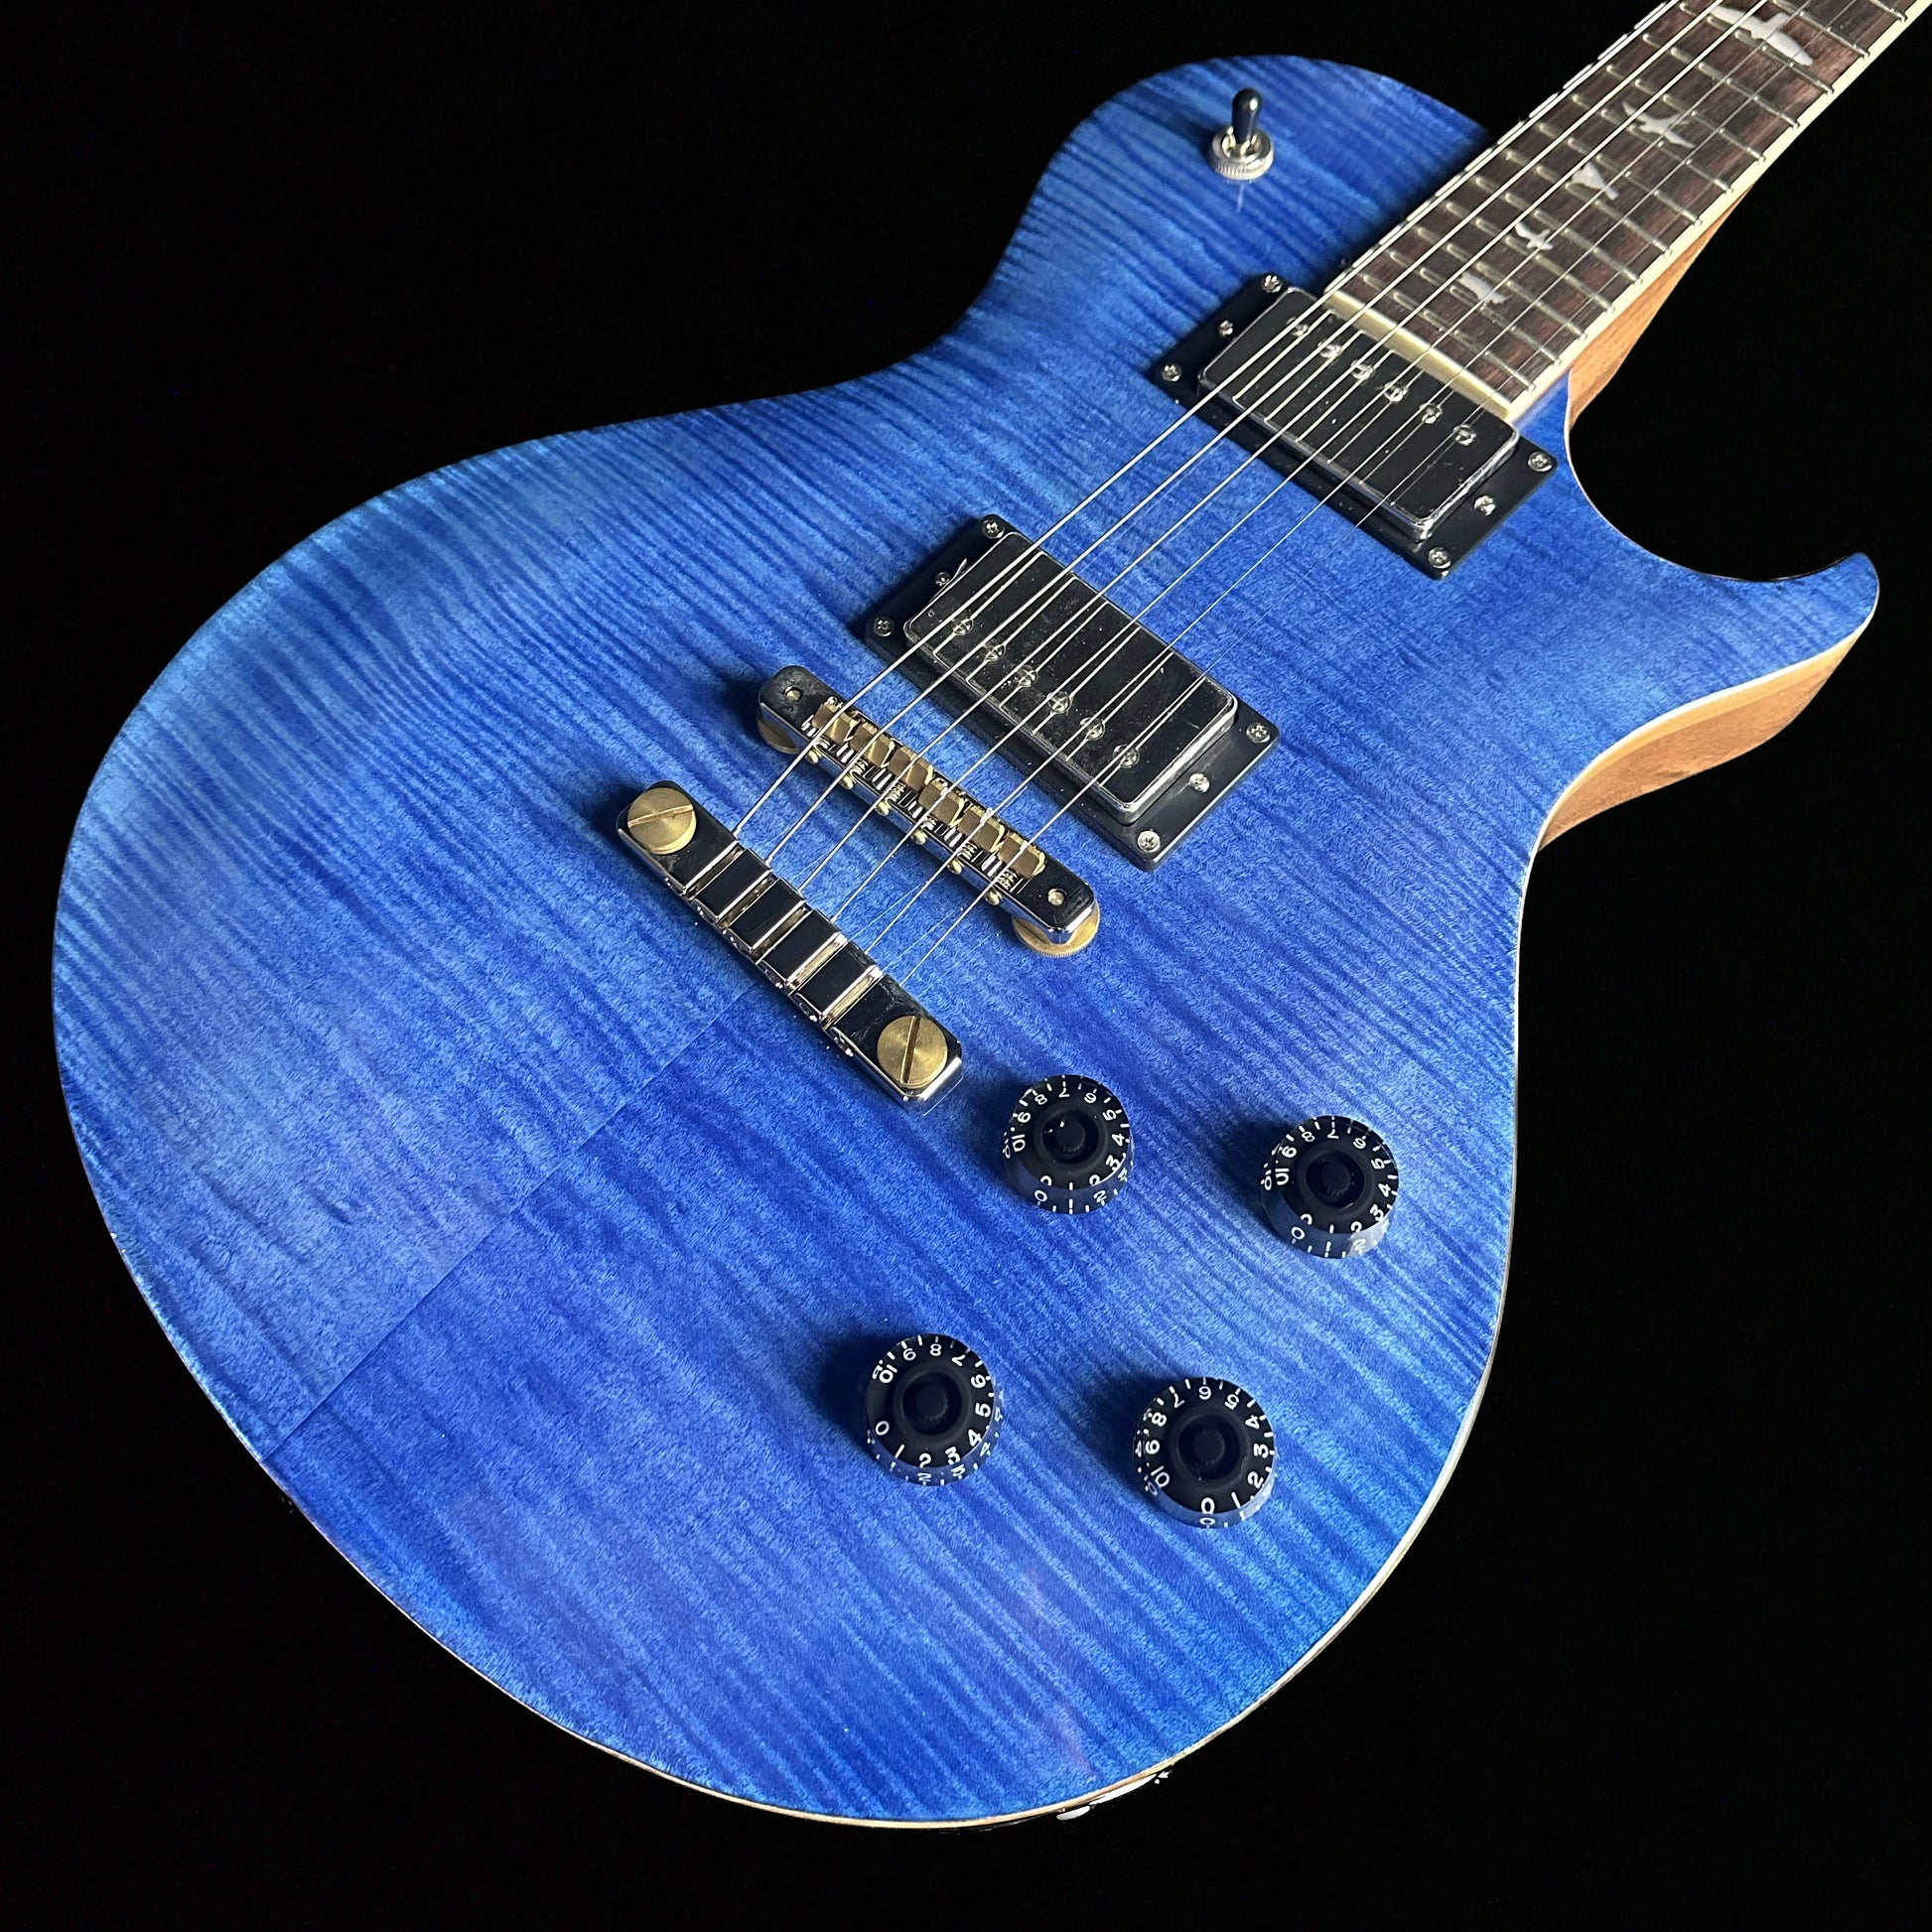 Bottom right angle of PRS Paul Reed Smith SE McCarty 594 Singlecut Faded Blue.